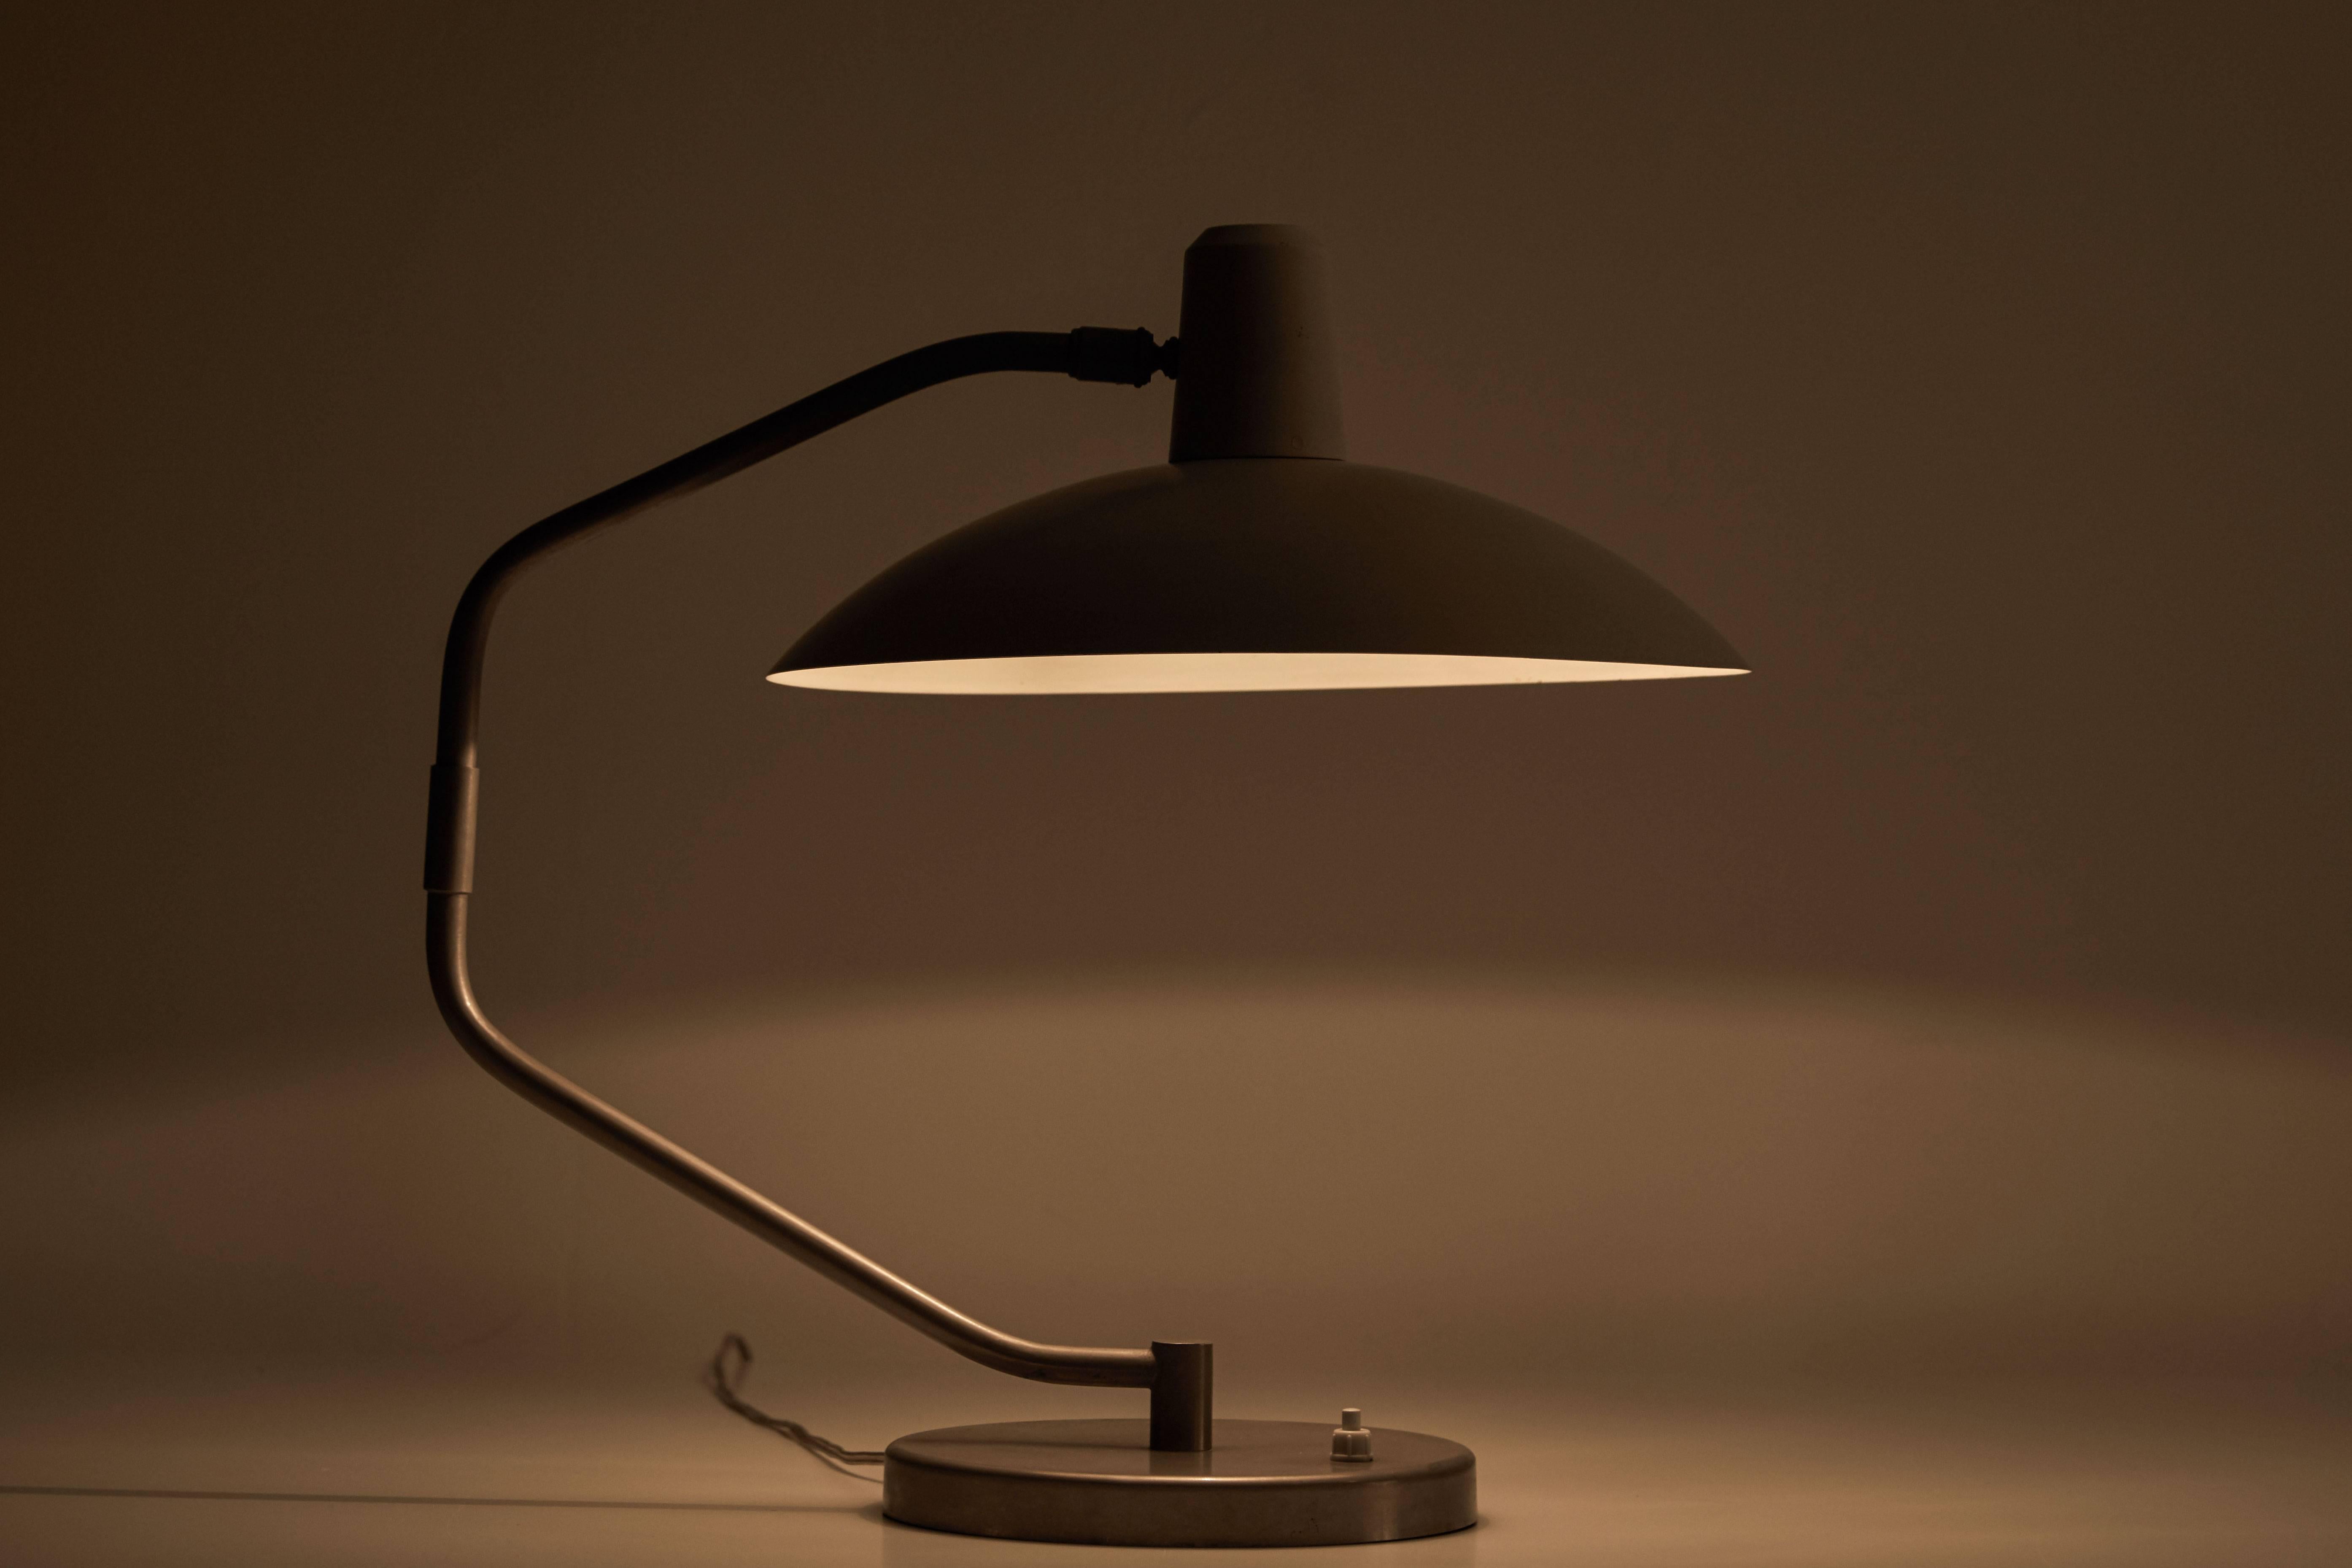 Table Lamp by Clay Michie for Regent Switzerland. Lacquered metal and chromed steel.Articulates and adjust to various positions. Designed in Switzerland circa 1960s. First edition. Original cords. Takes one E27 100w maximum bulb. Change Manufacture